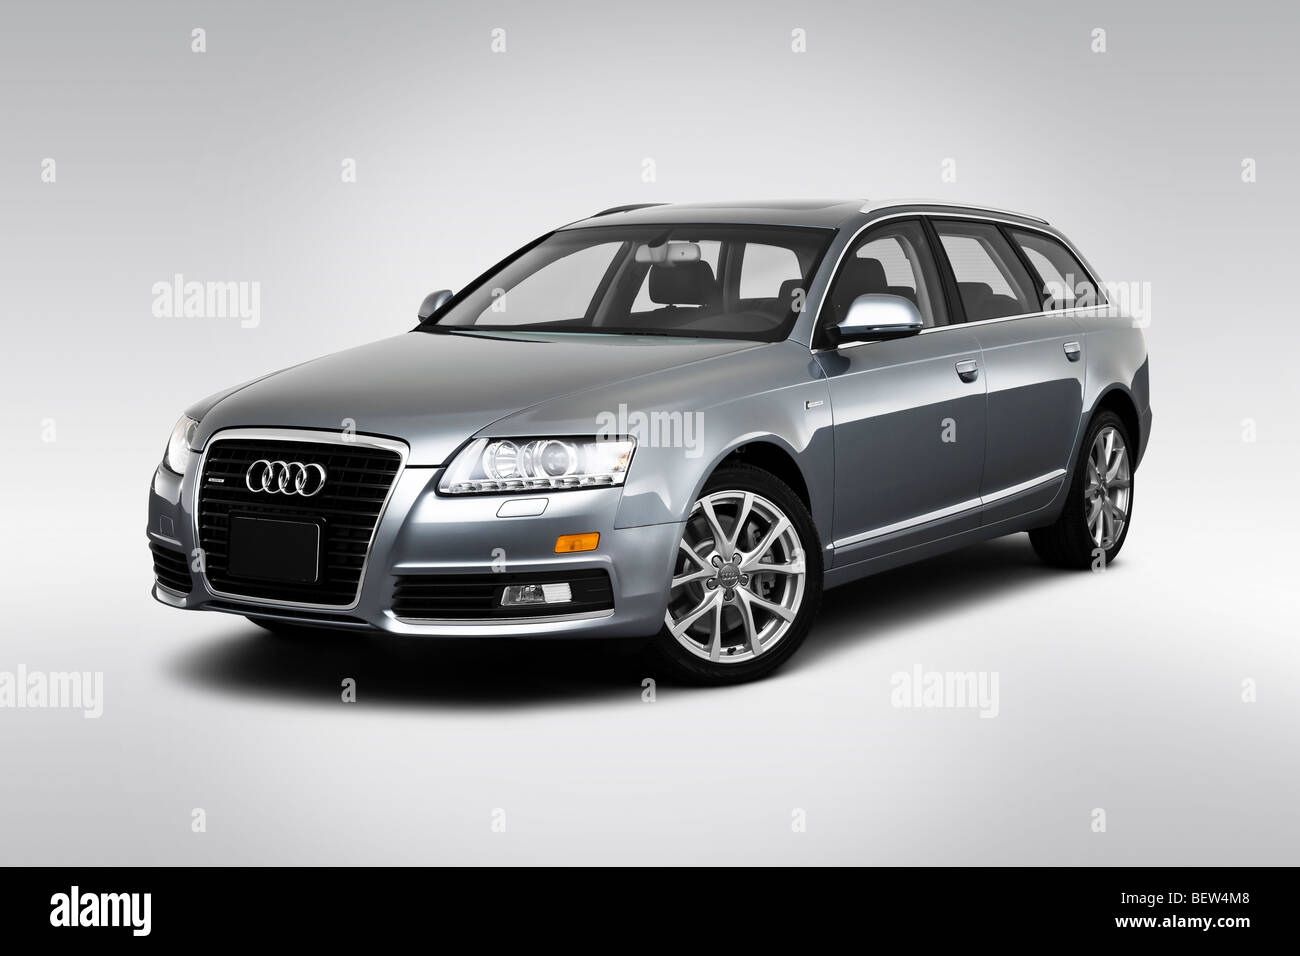 2010 Audi A6 Avant 3.0 quattro in Gray - Front angle view Stock Photo -  Alamy